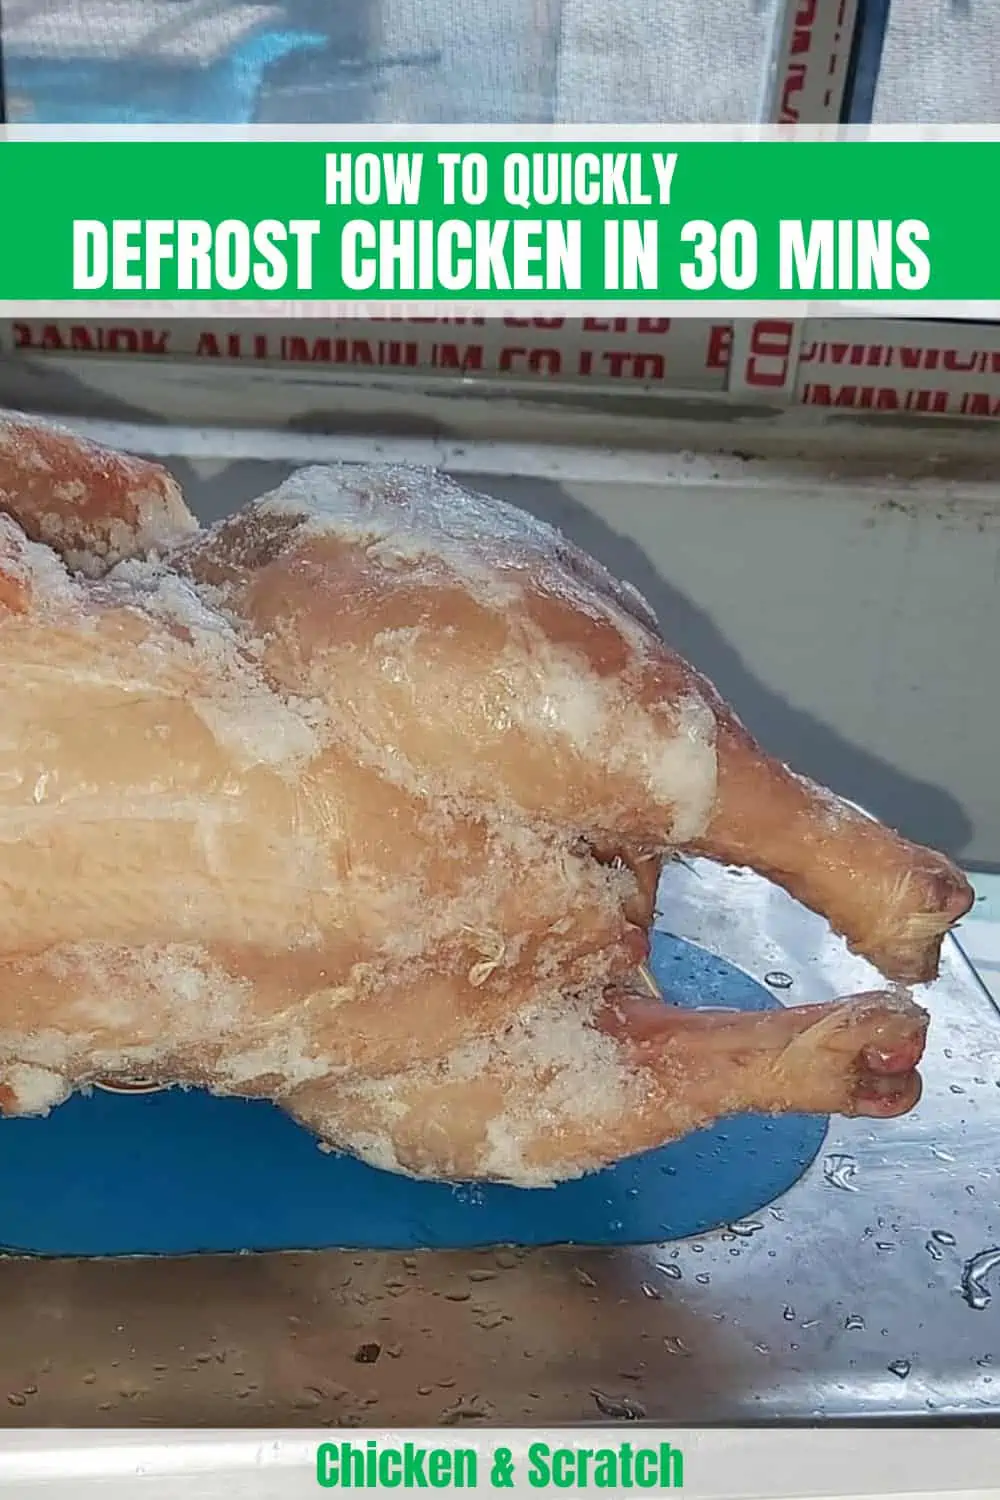 How to Quickly Defrost Chicken